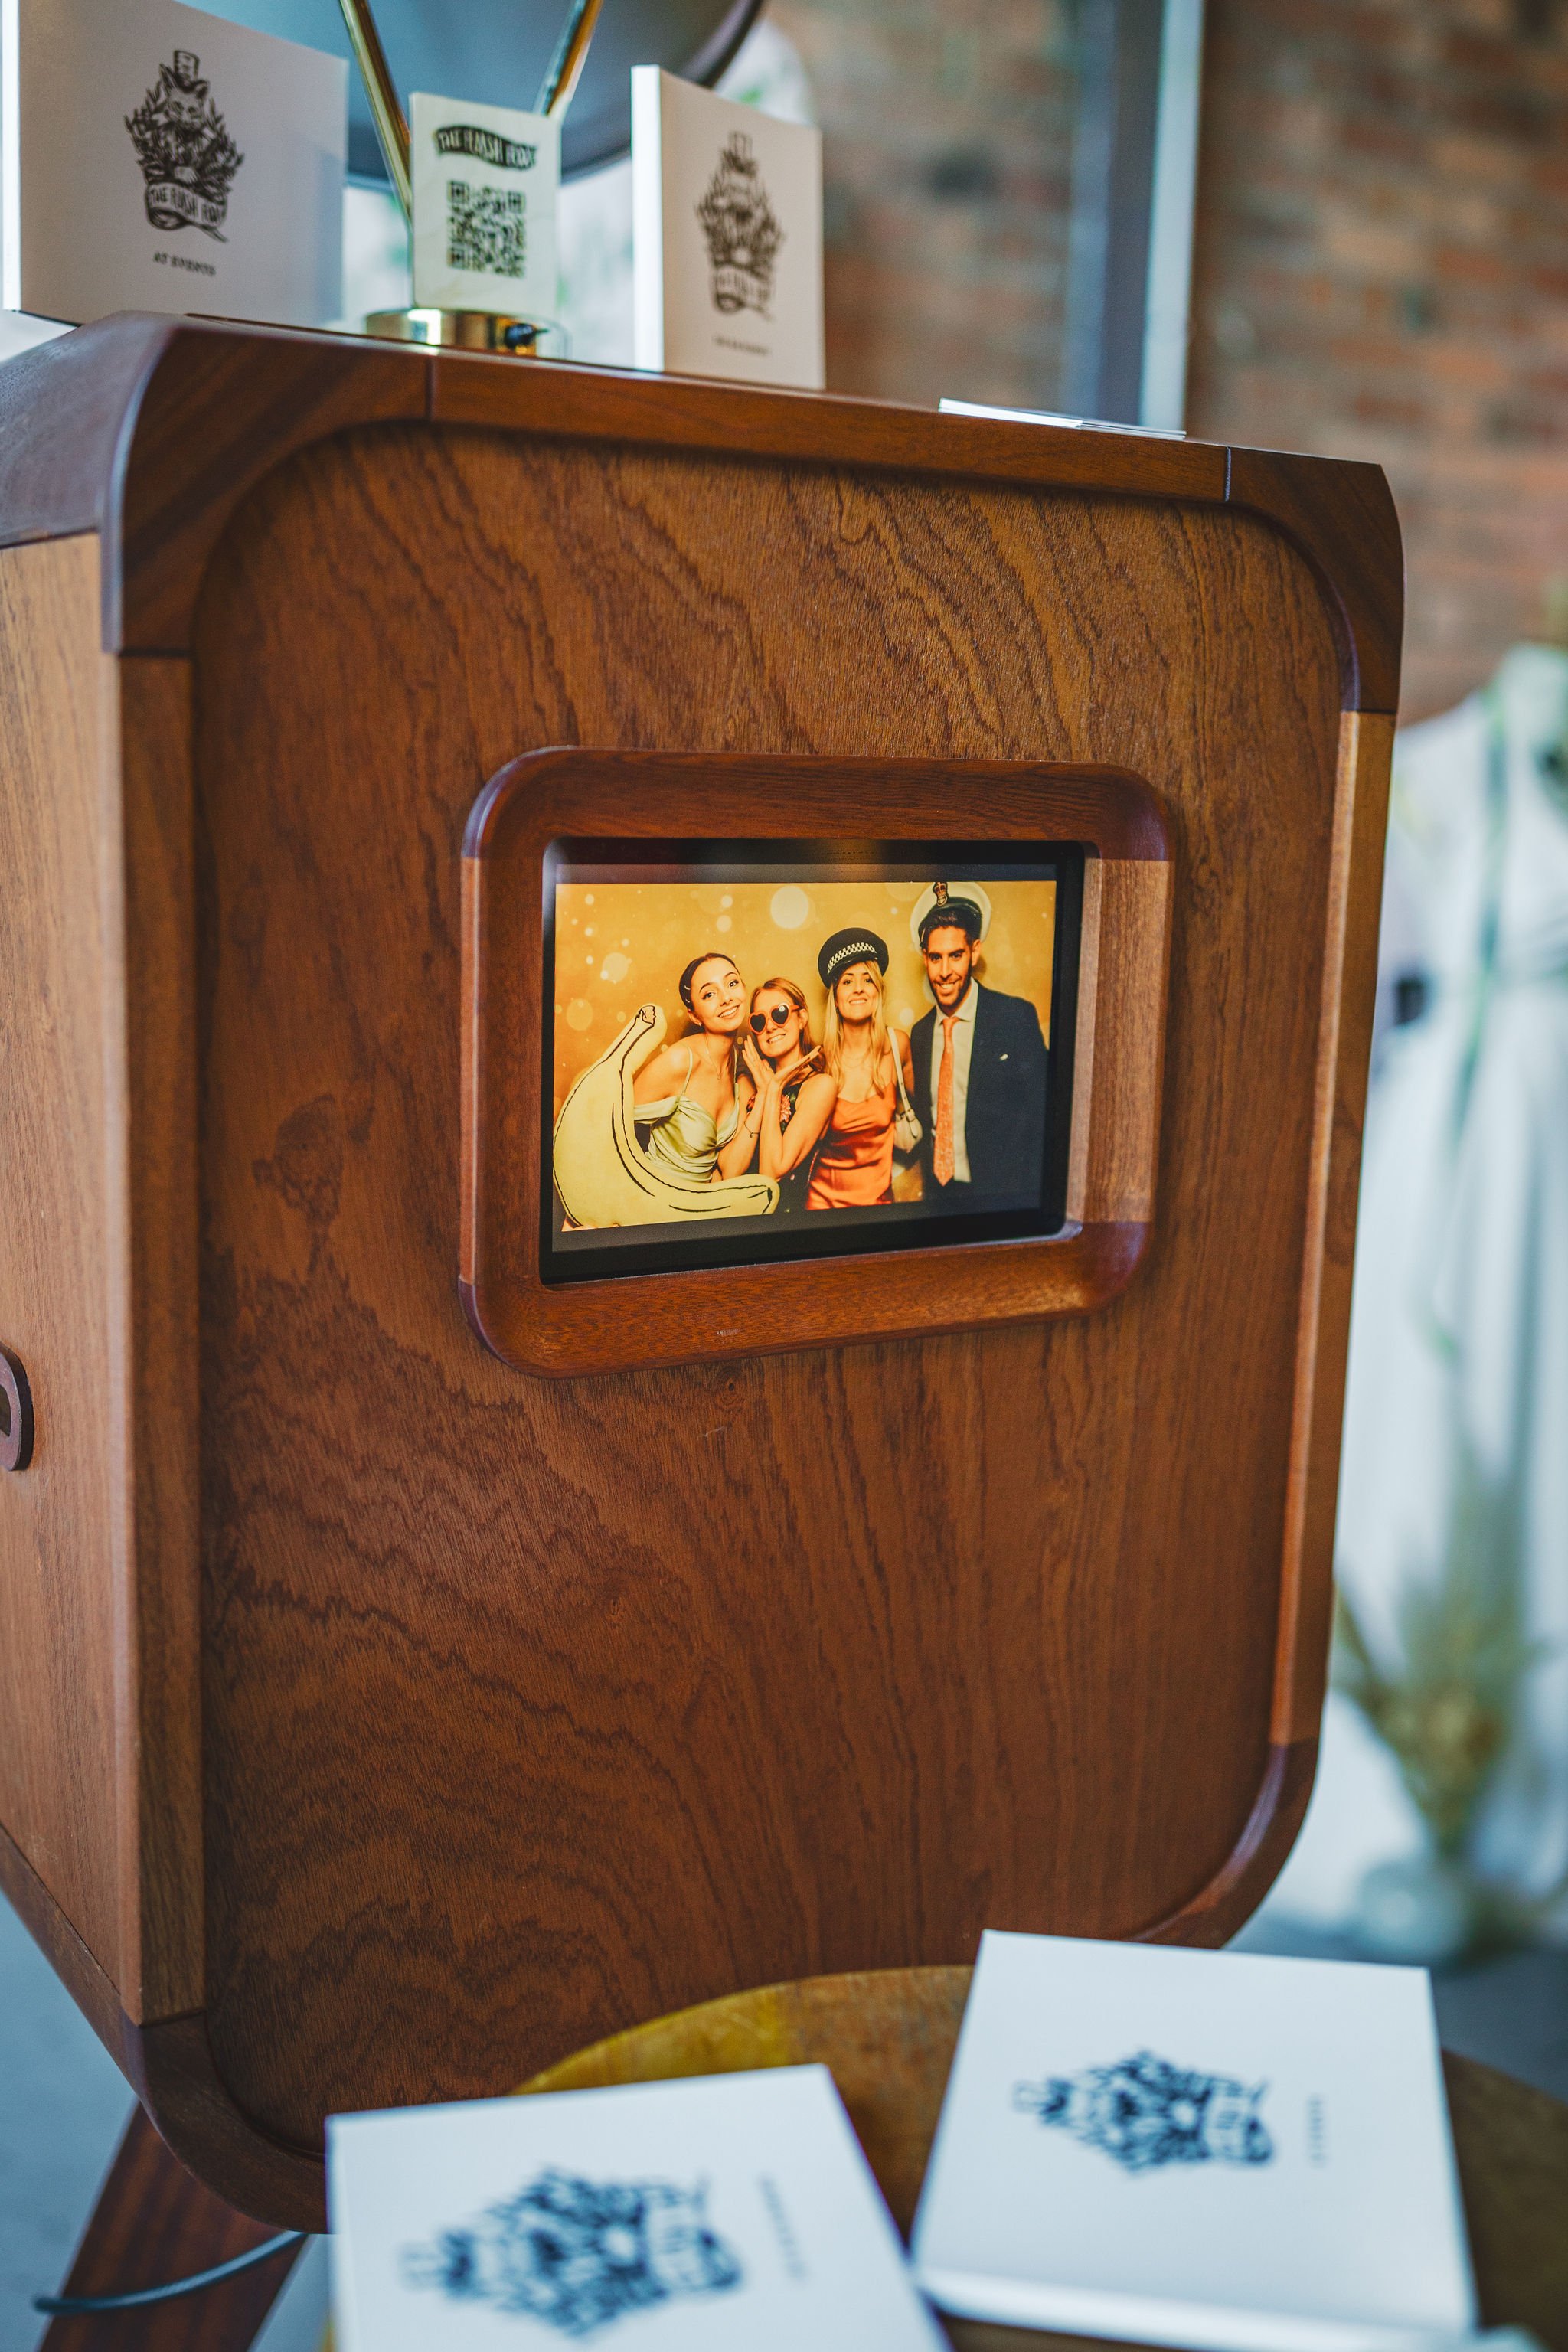  Cool retro looking camera as a photobooth for wedding entertainment. 